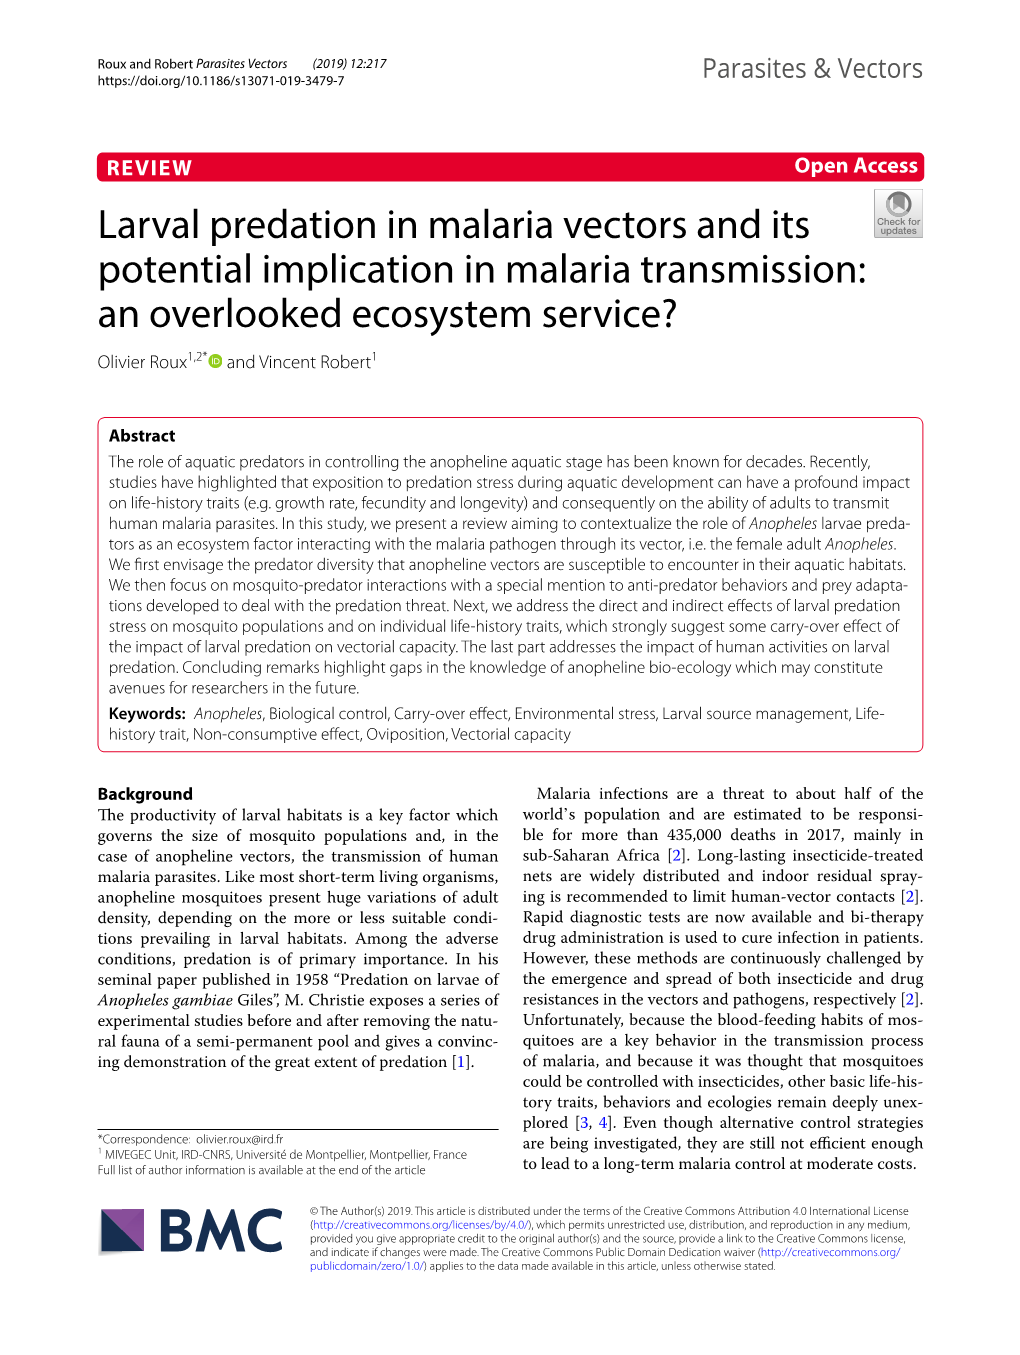 Larval Predation in Malaria Vectors and Its Potential Implication in Malaria Transmission: an Overlooked Ecosystem Service? Olivier Roux1,2* and Vincent Robert1